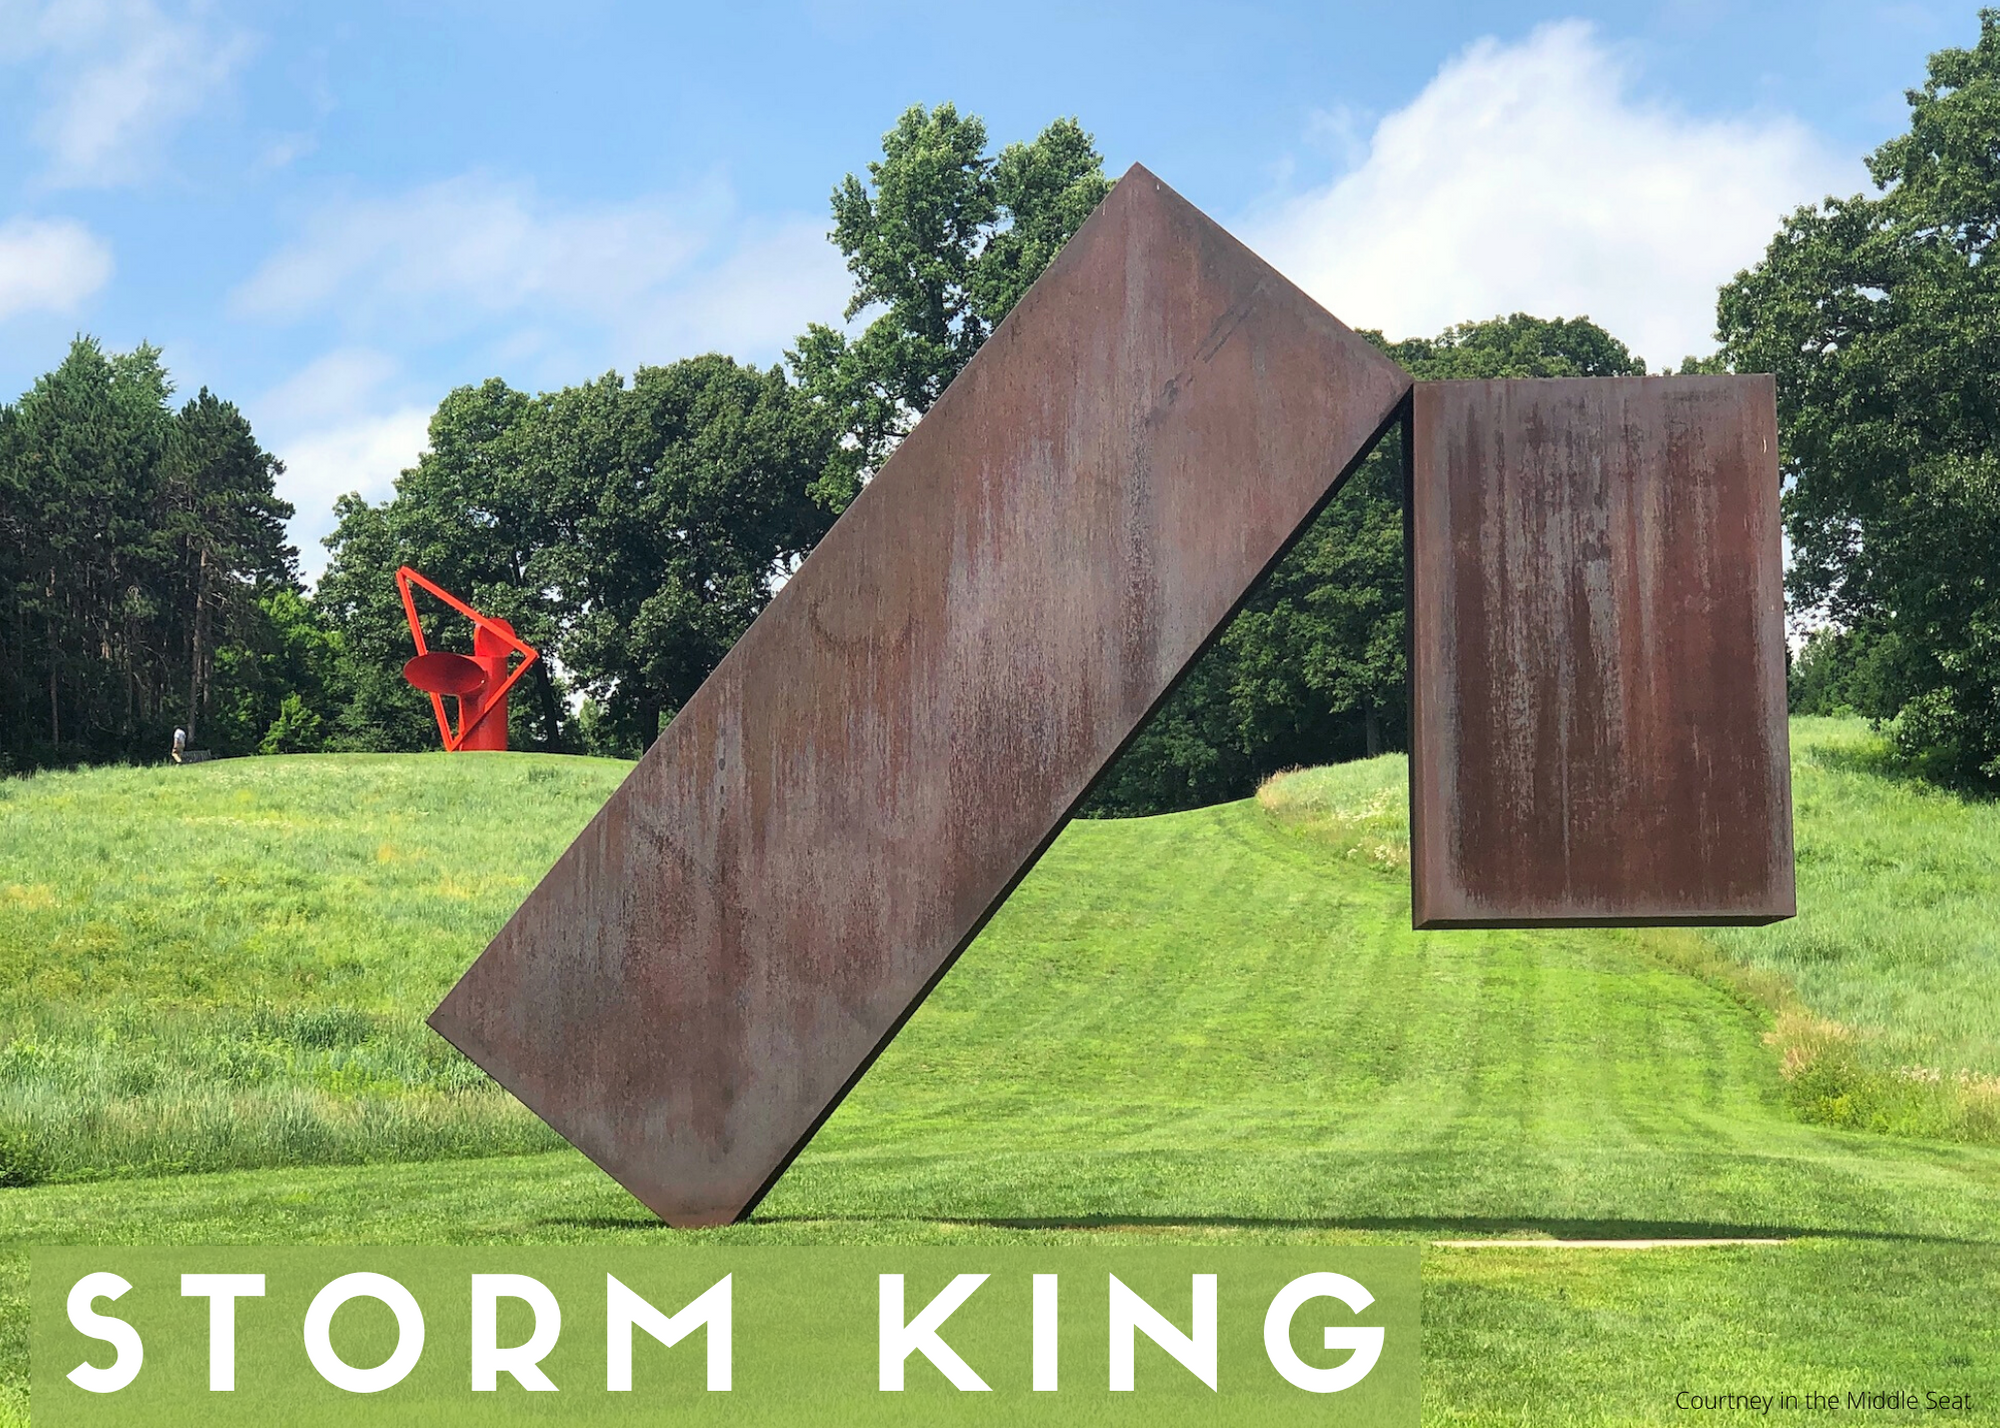 Storm King Art Center Guide to Visiting featuring Suspended by Menashe Kadishman